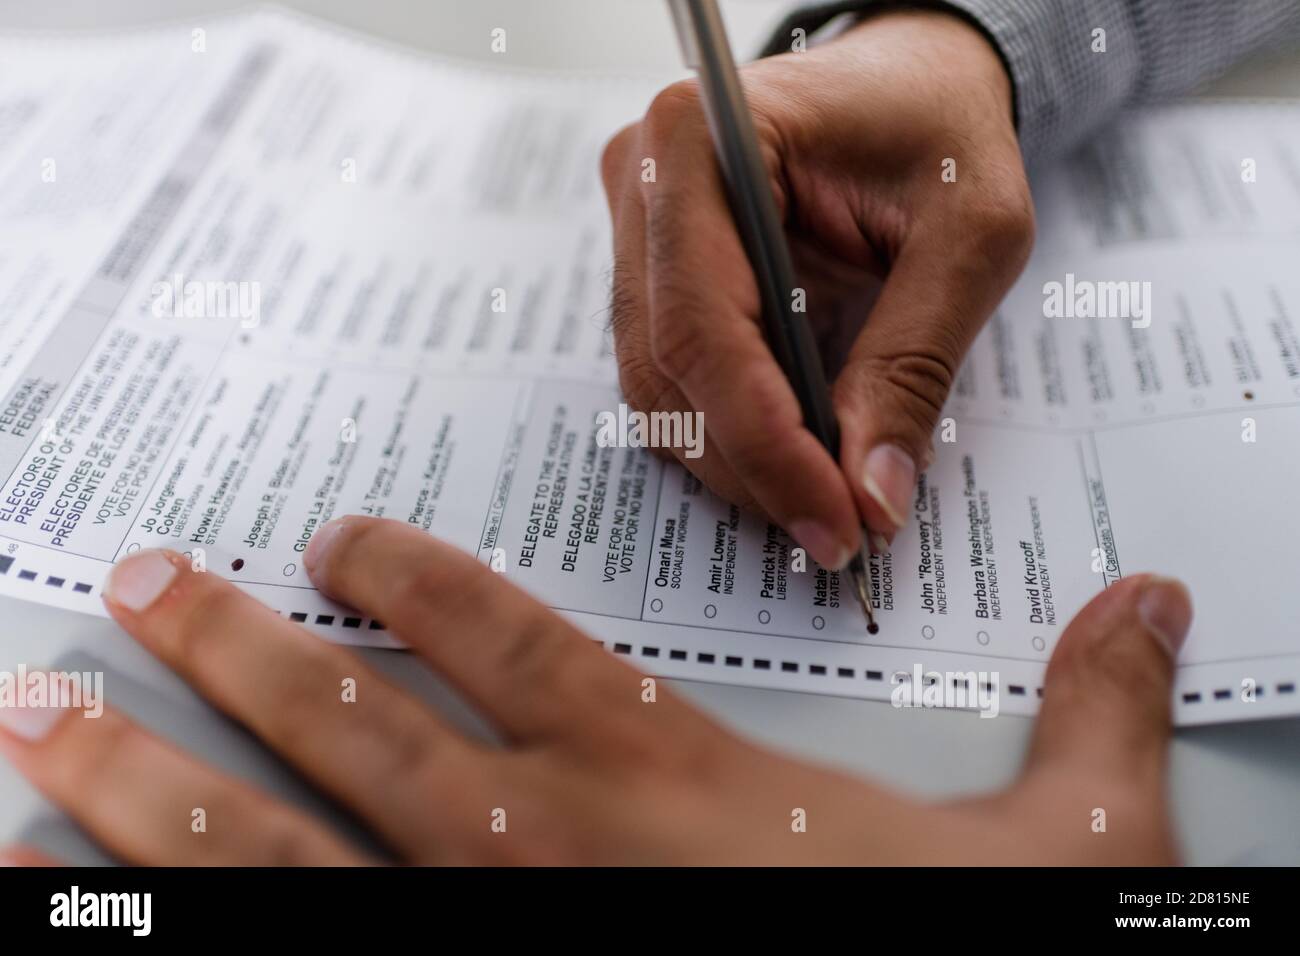 close up of man's hands completing absentee ballot for election Stock Photo